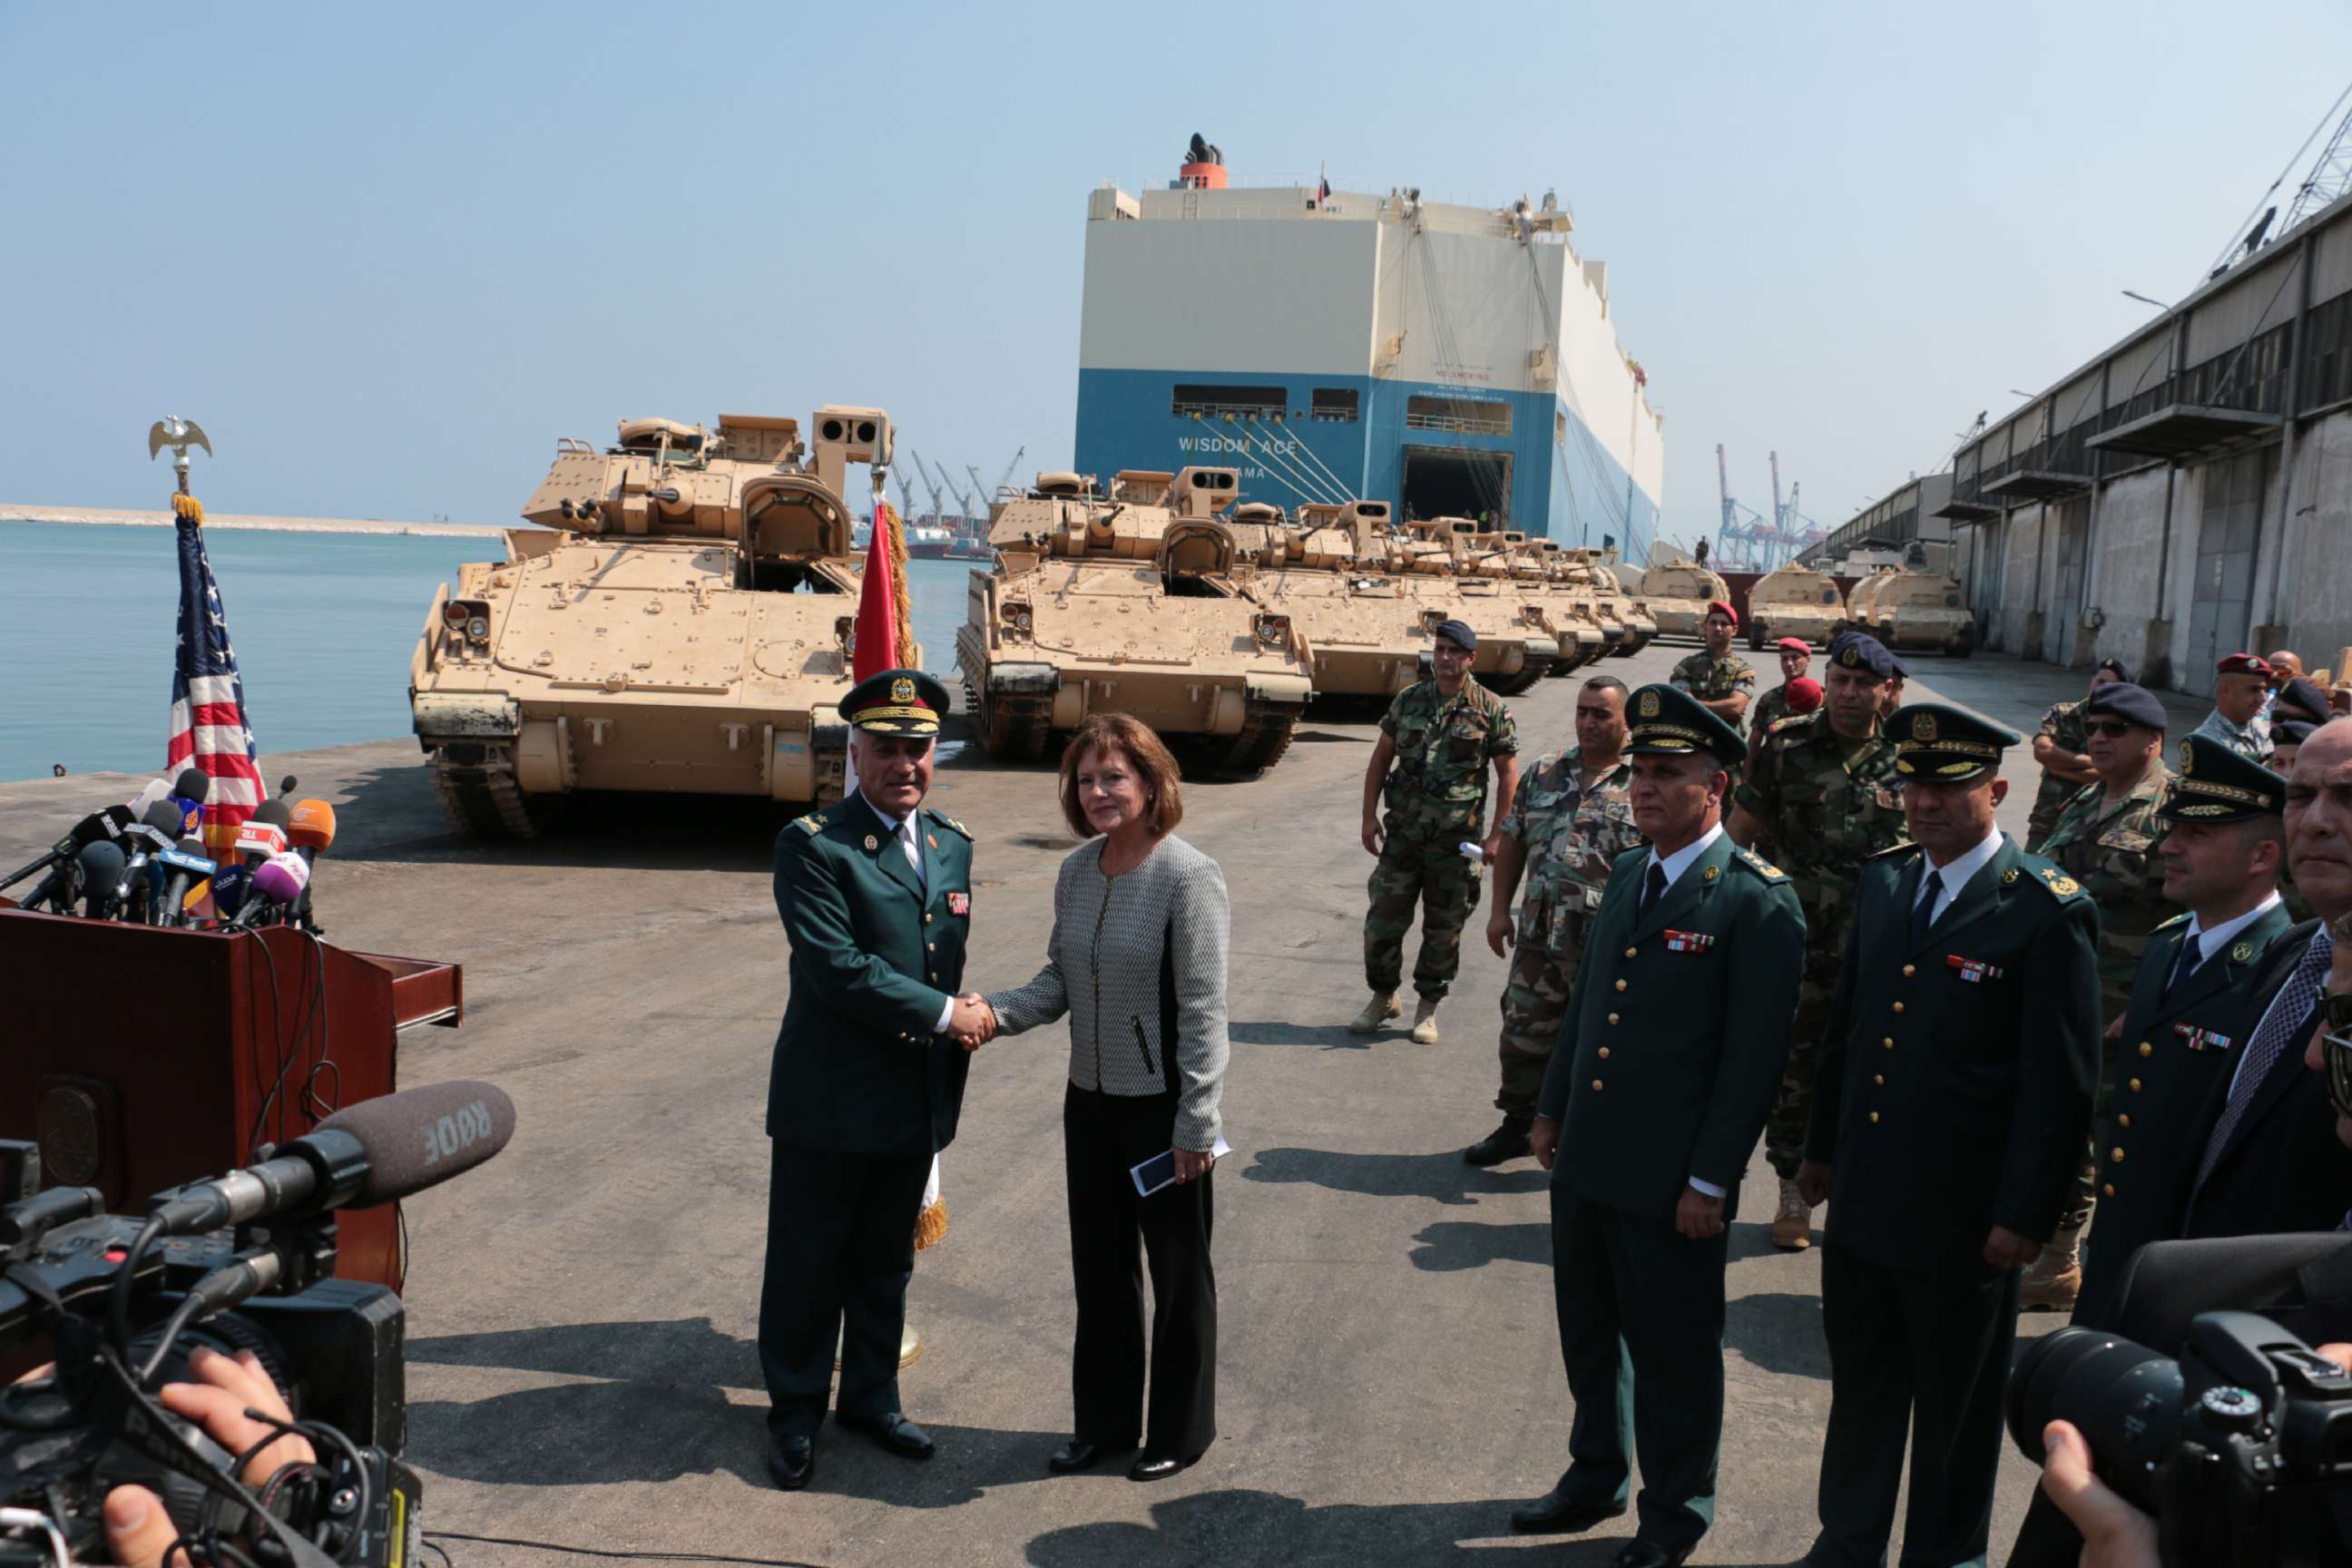 PHOTO: Elizabeth Richard, U.S. Ambassador to Lebanon, right, and official army members attend a ceremony of armored military vehicles are unloaded from ships at Beirut's port in Lebanon on Aug. 14, 2017.